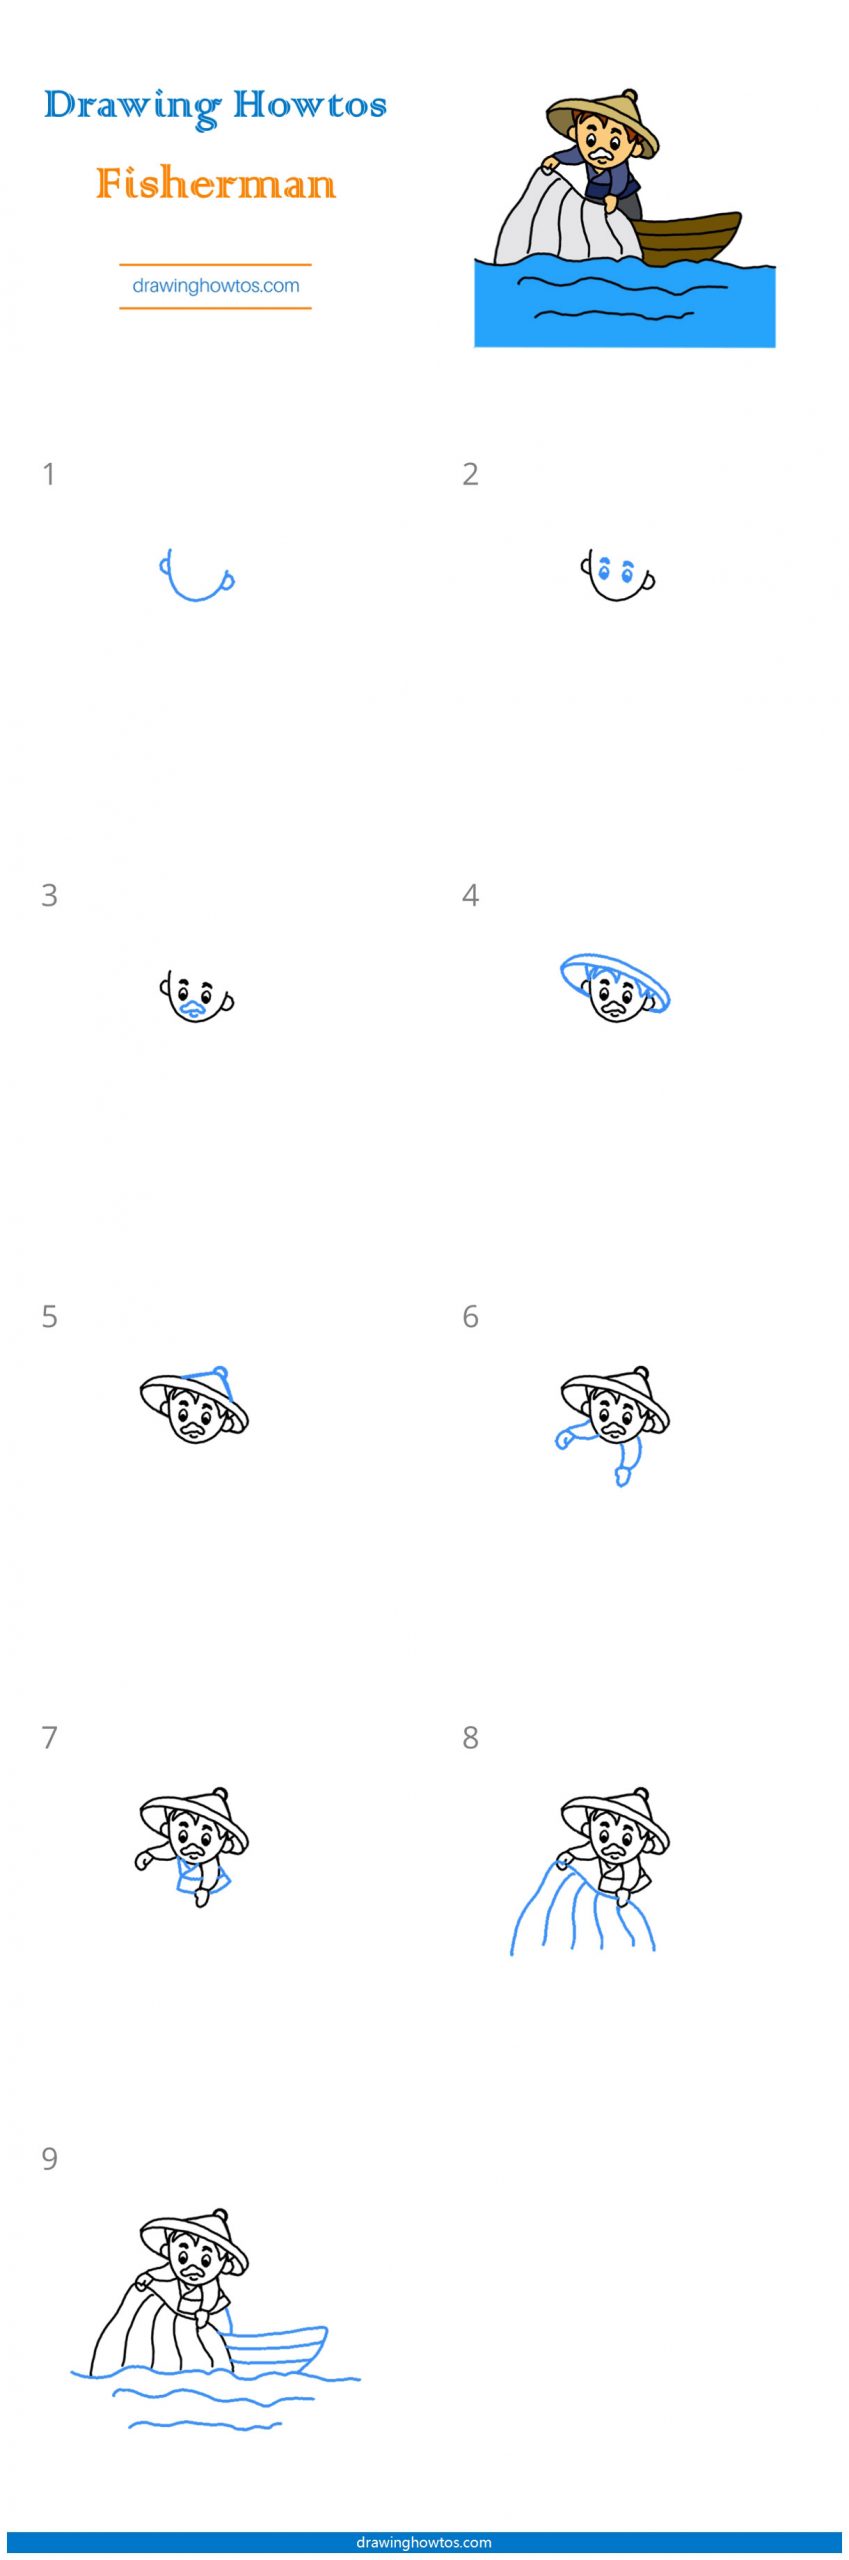 How to Draw a Fisherman Step by Step